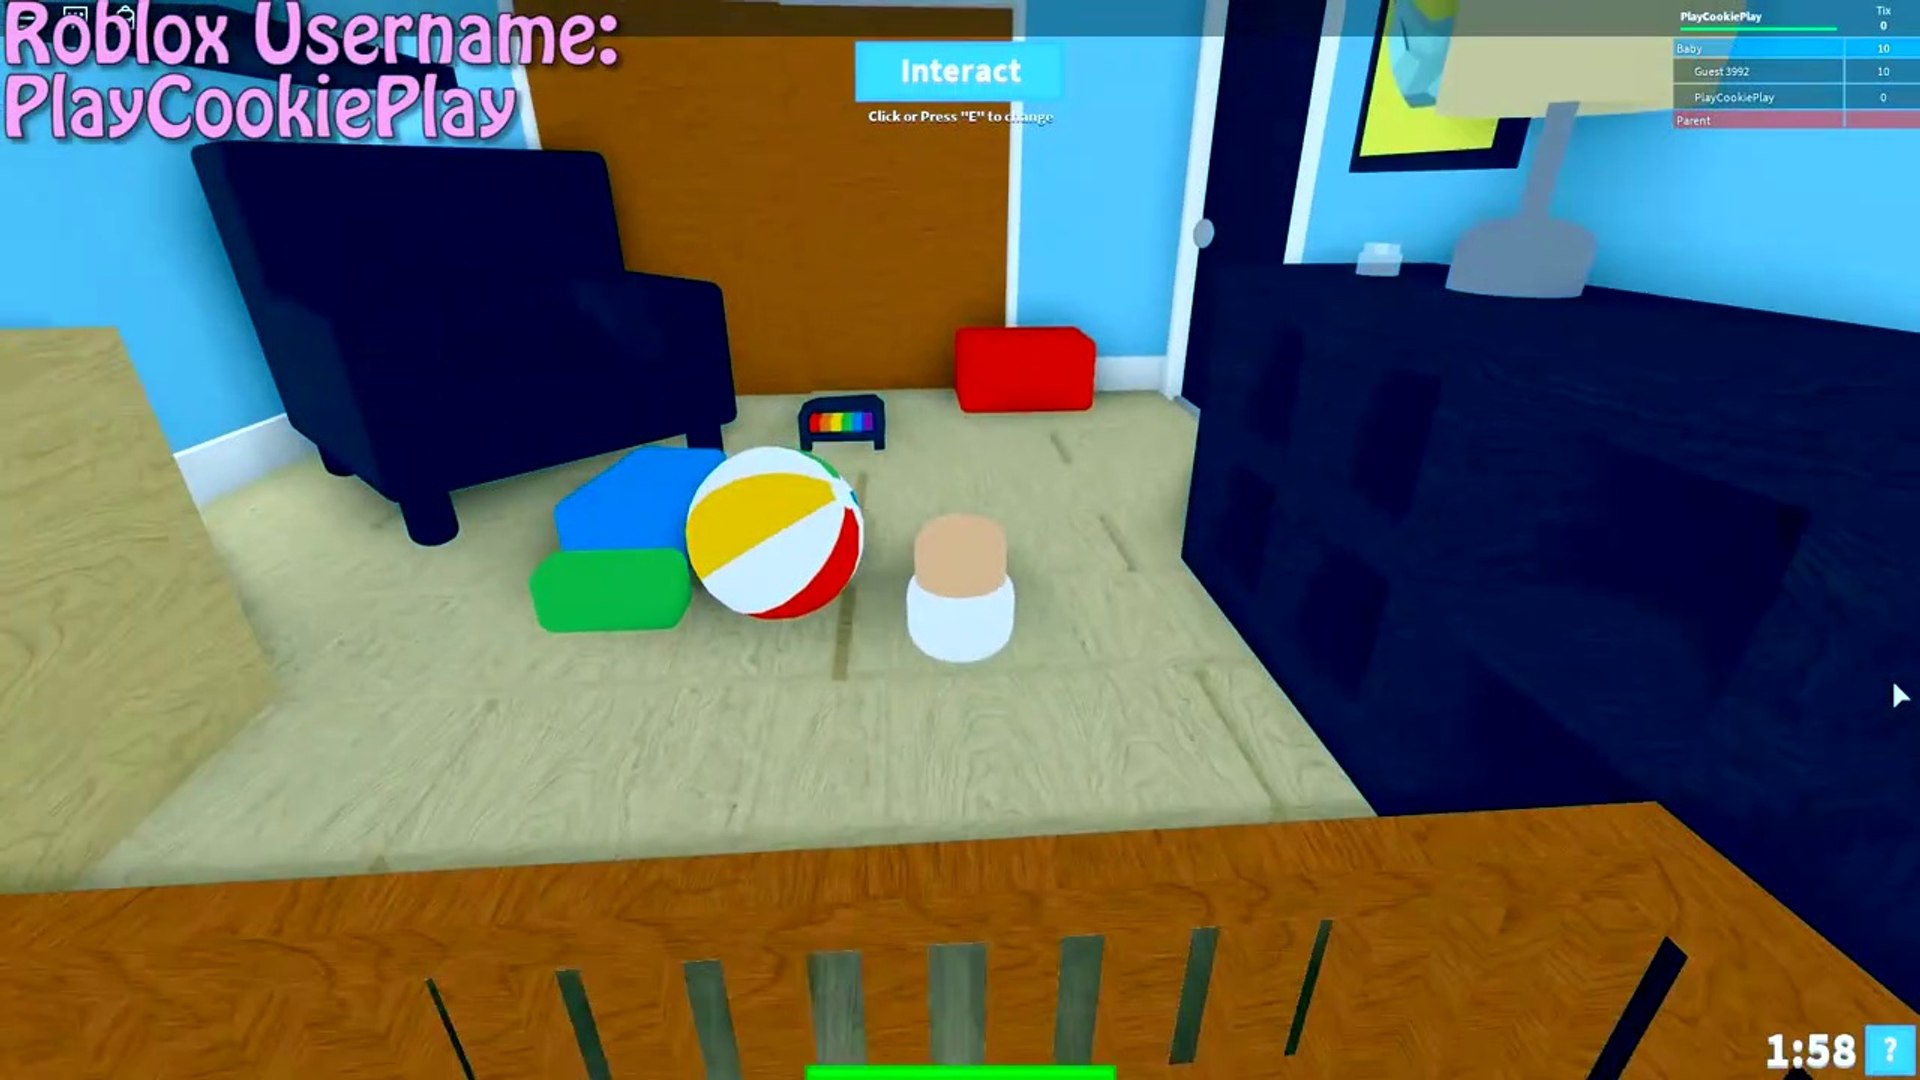 Hamsters In The House Roblox Animal House Pets Online Game Let S Play Random Fun Video Wmodxec Video Dailymotion - cutest game ever roblox hamster simulator wwonderwall gameplay